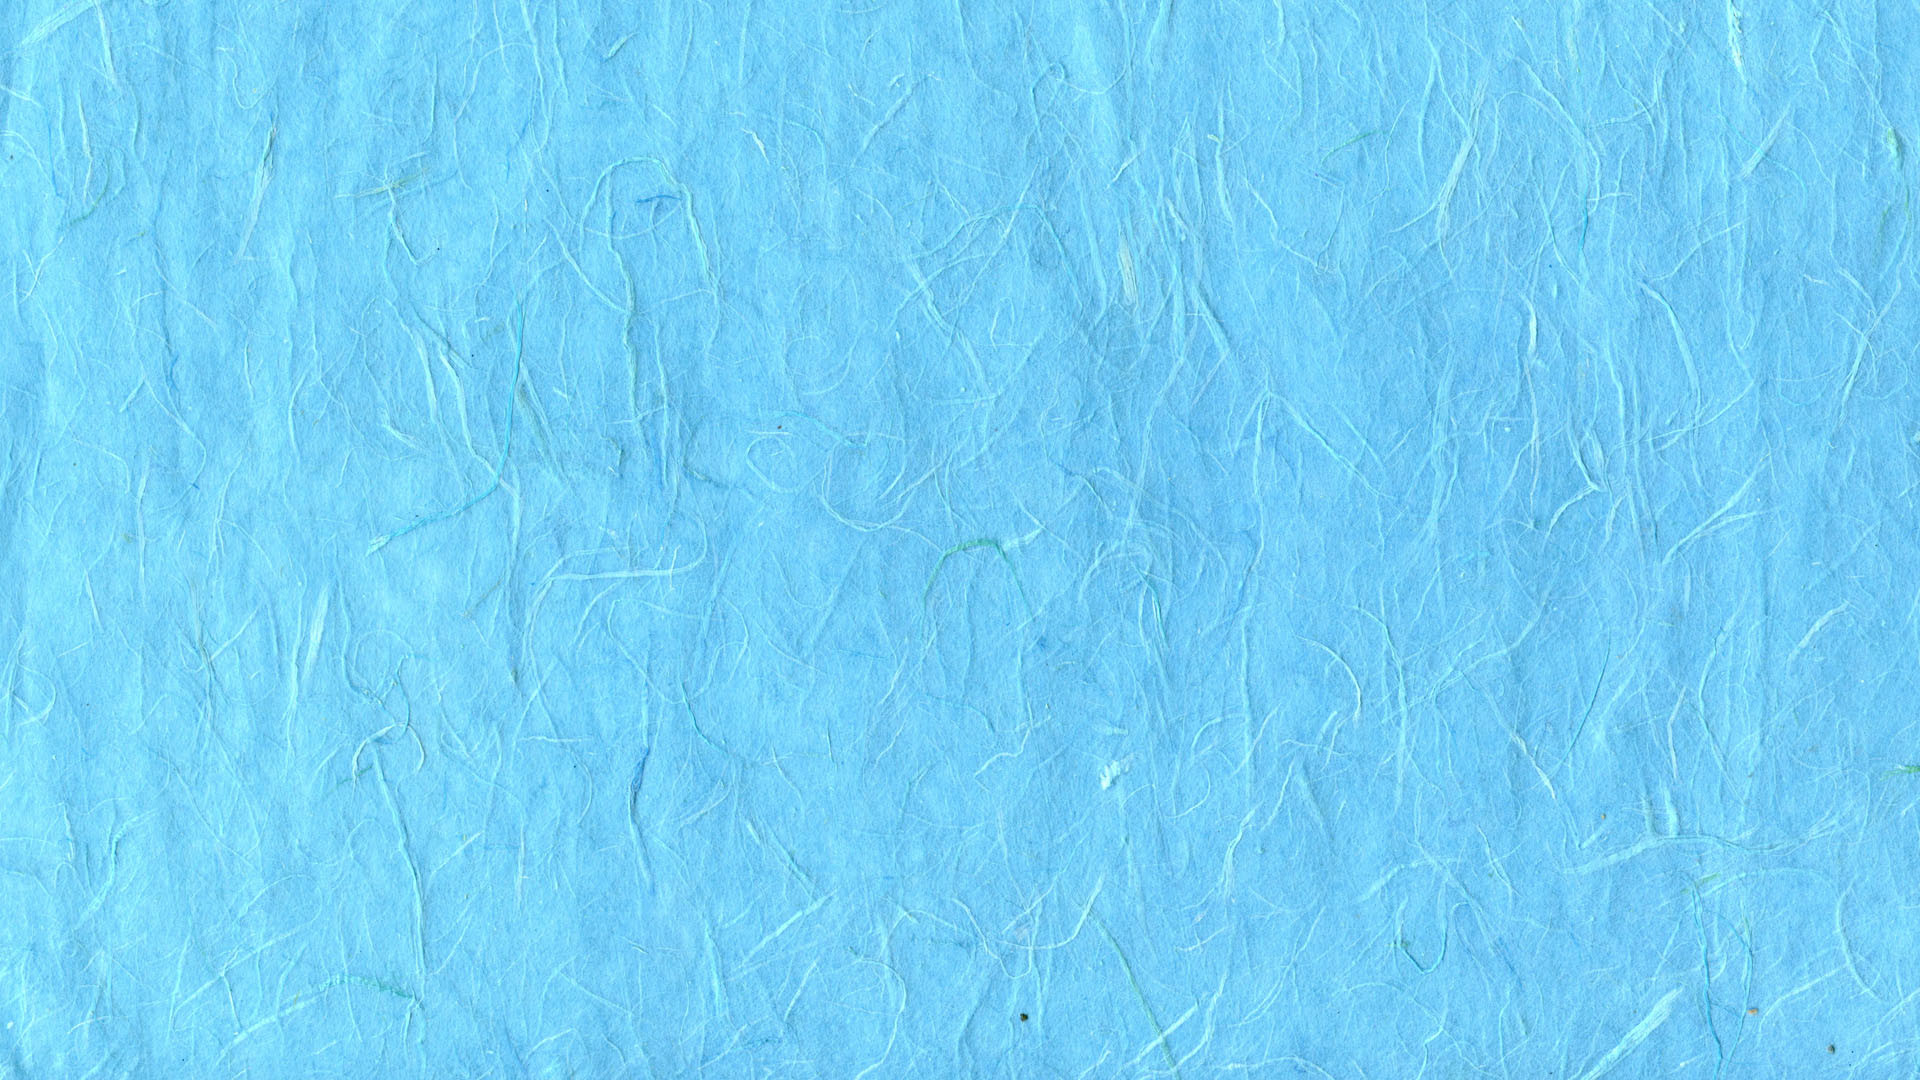 1920x1080 ... Blue textured paper by Thaily-stock